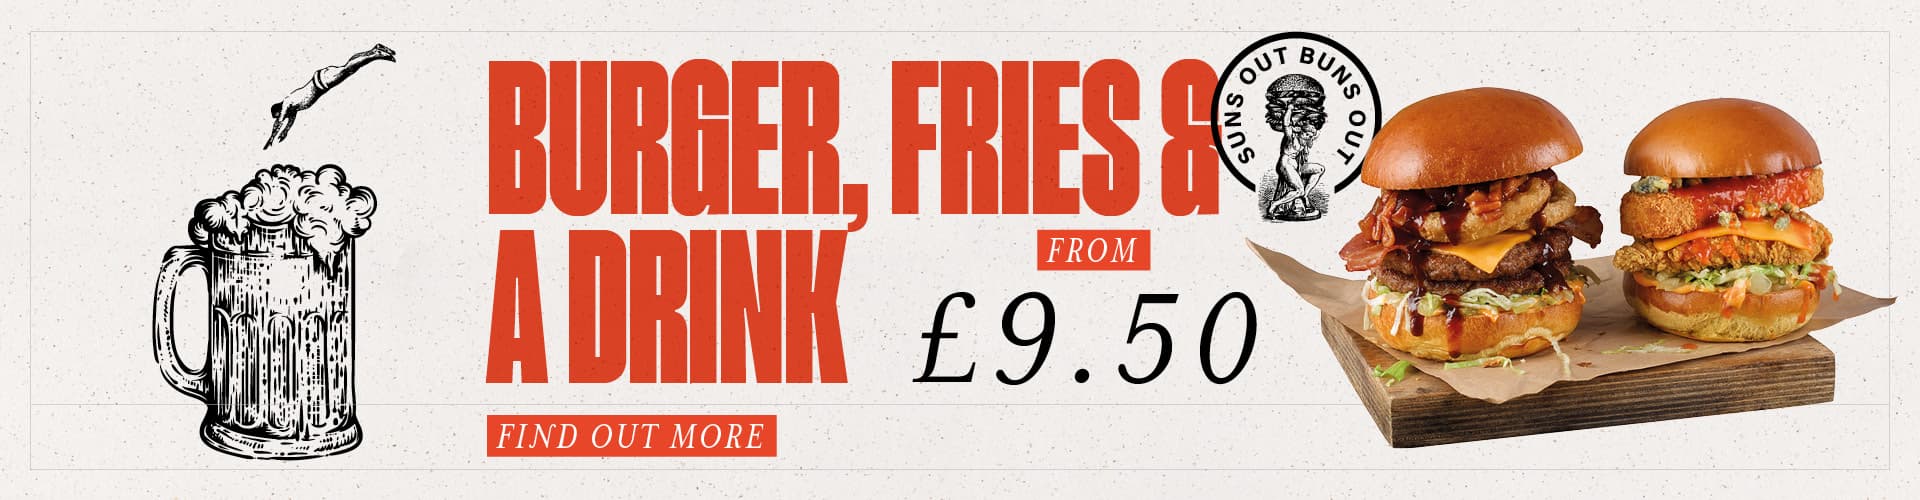 Burger, Fries & a Drink, from £9.50. Find out more.